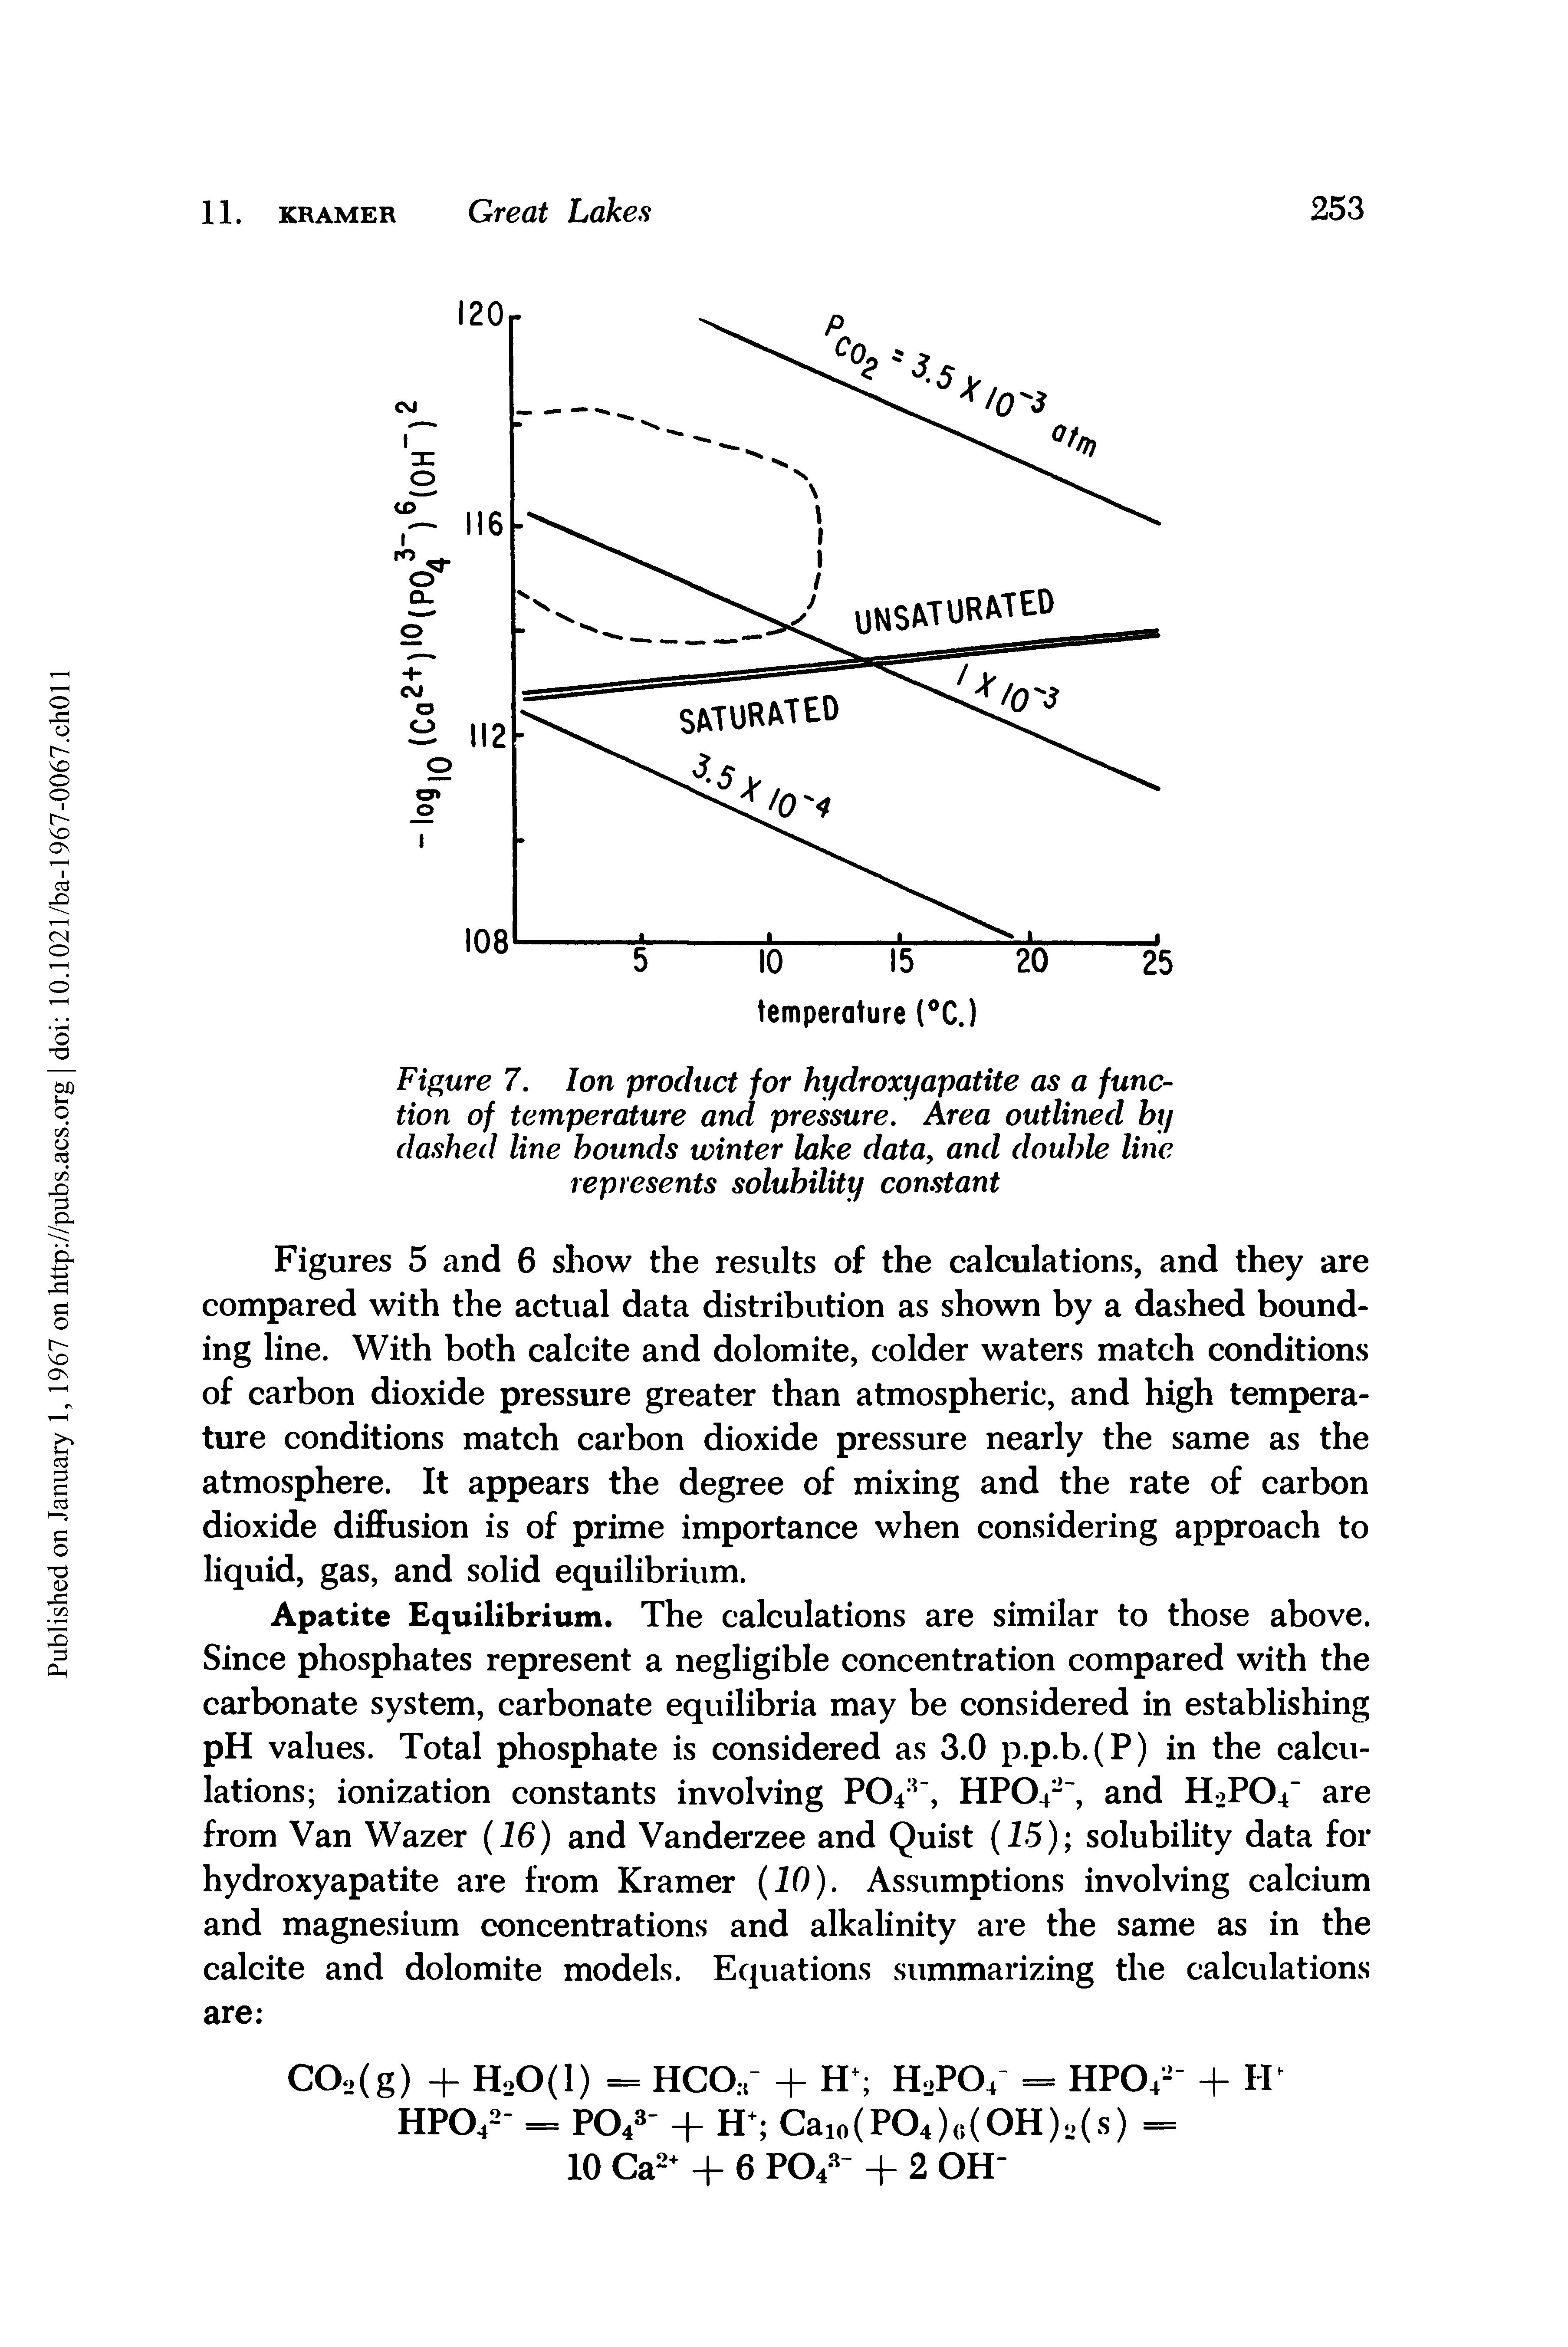 Figures 5 and 6 show the results of the calculations, and they are compared with the actual data distribution as shown by a dashed bounding line. With both calcite and dolomite, colder waters match conditions of carbon dioxide pressure greater than atmospheric, and high temperature conditions match carbon dioxide pressure nearly the same as the atmosphere. It appears the degree of mixing and the rate of carbon dioxide diffusion is of prime importance when considering approach to liquid, gas, and solid equilibrium.